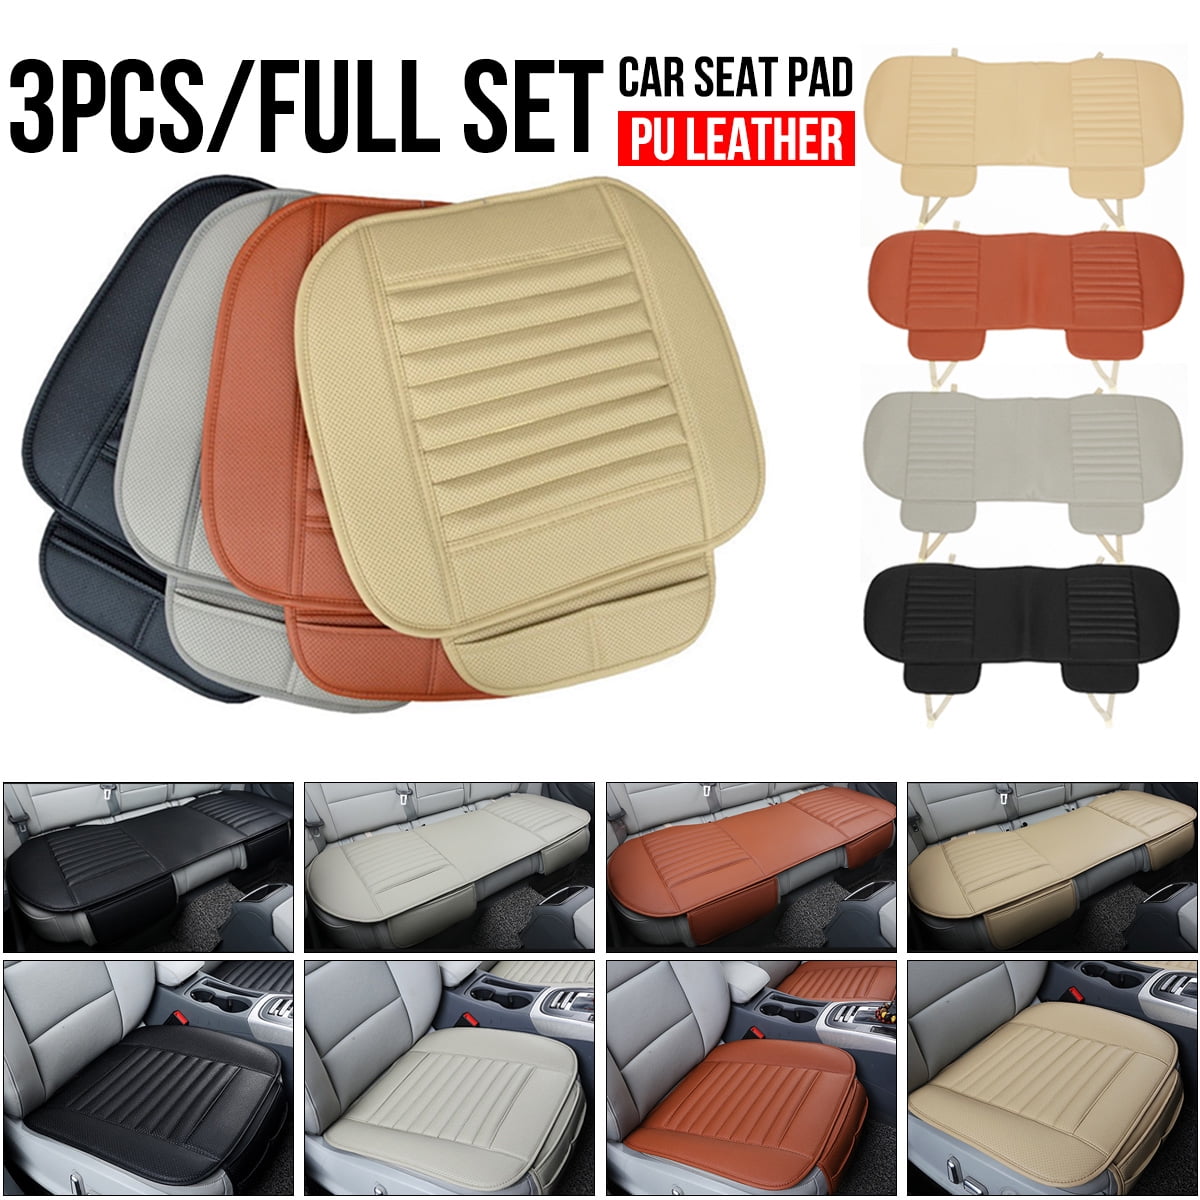 General Breathable PU Leather Car Seat Cover Pad Mat for Auto Chair Cushion Seat 